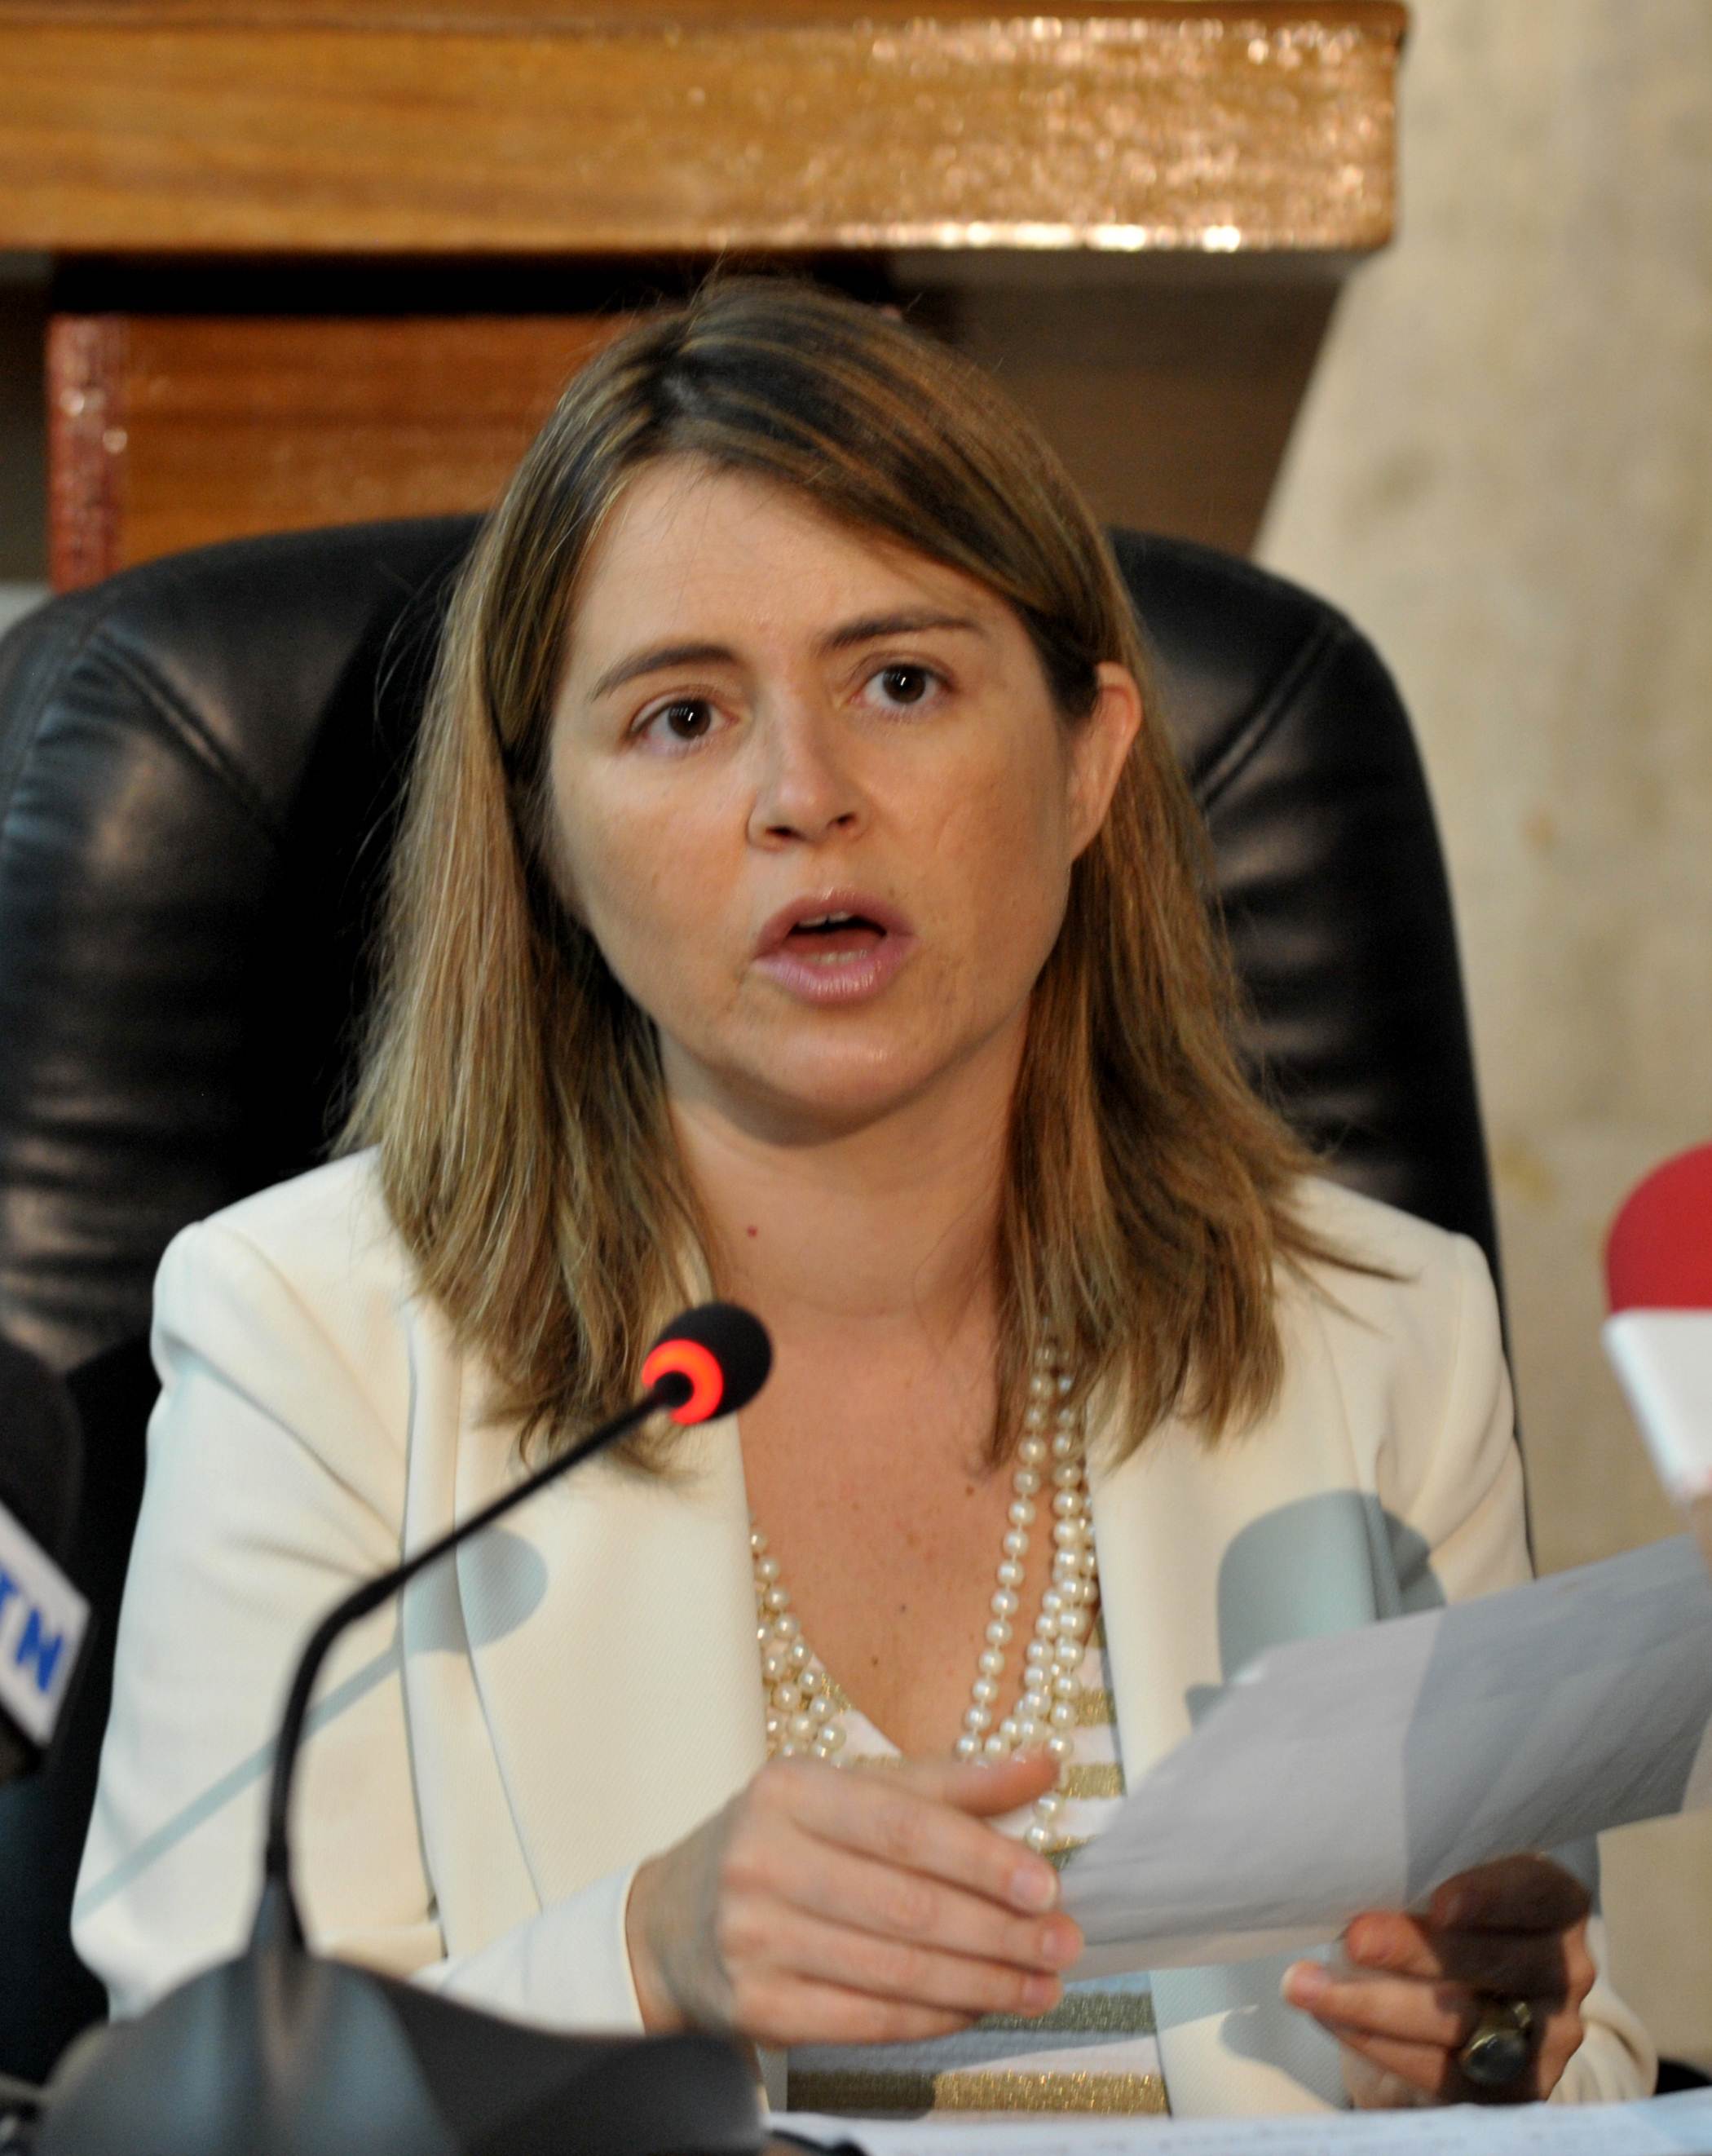 Catarina de Albuquerque said water companies should not disconnect the services of those unable to pay the tariffs